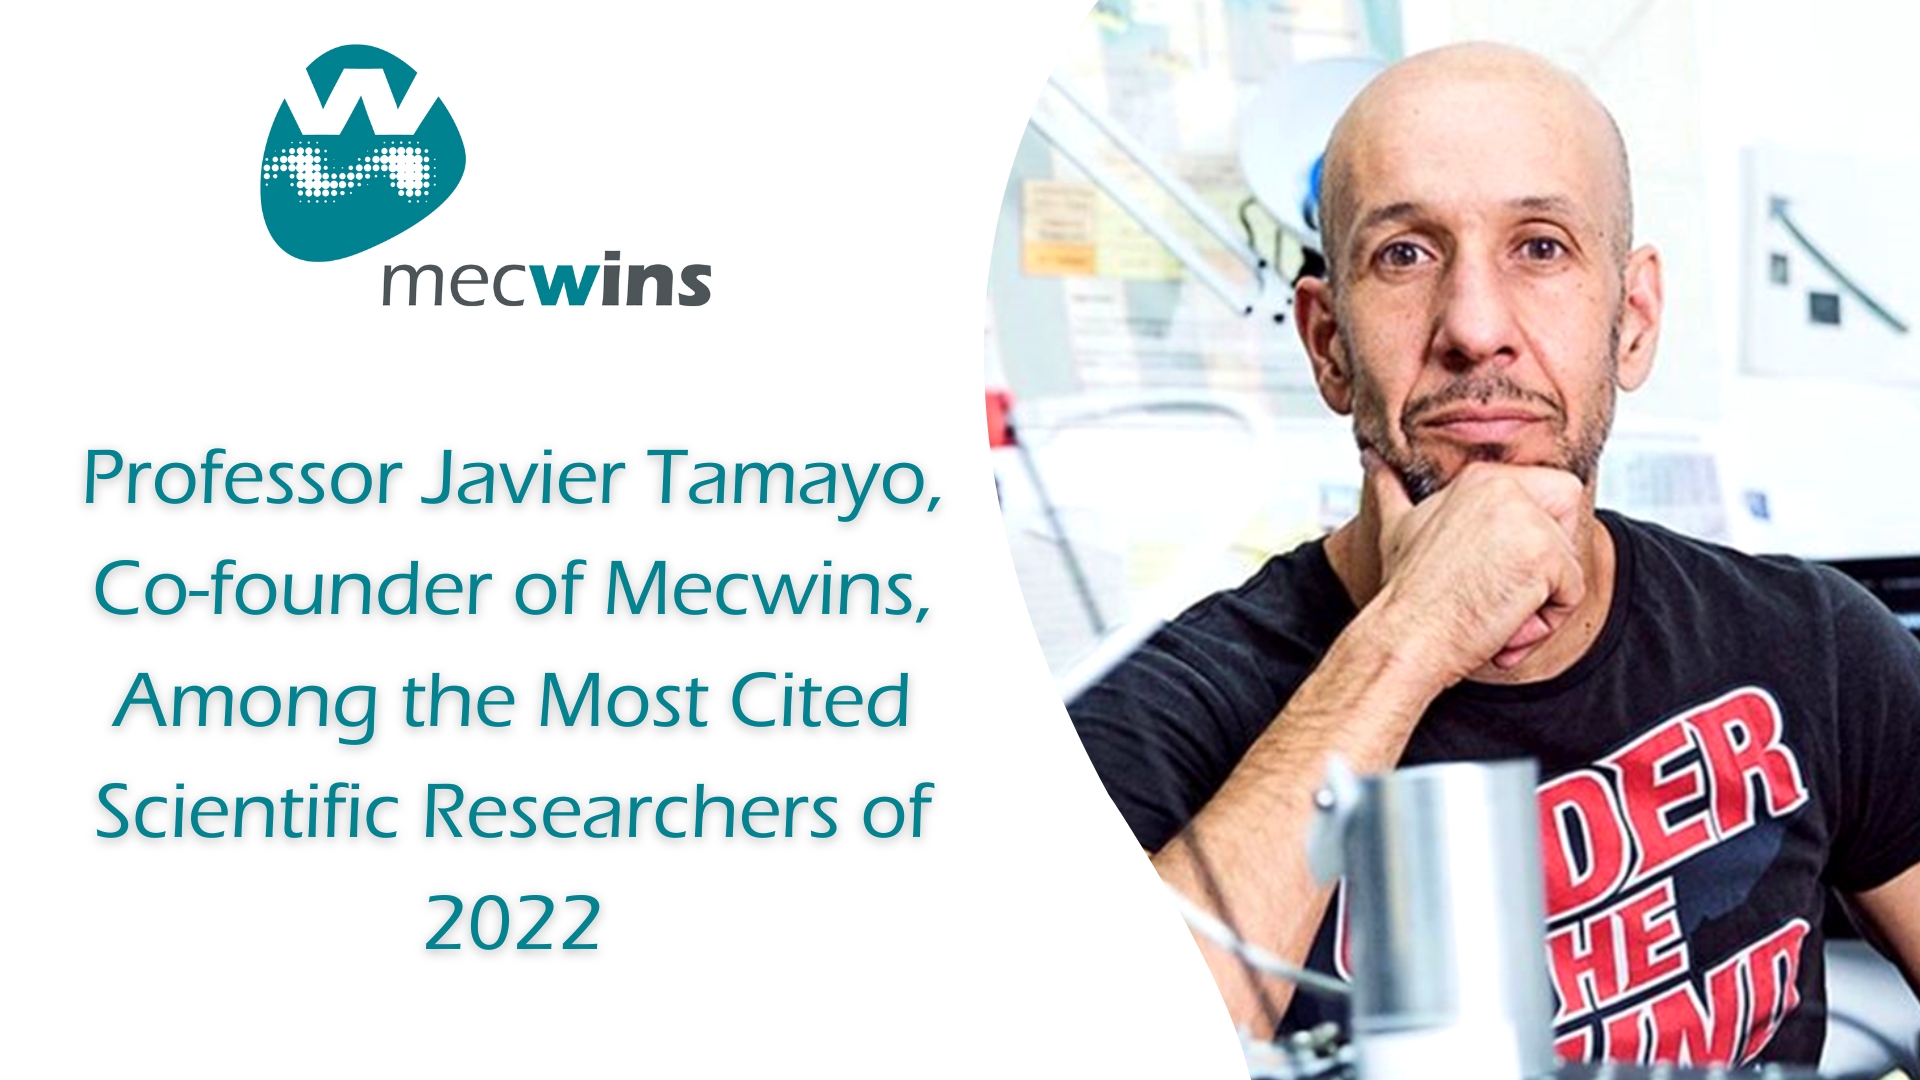 Professor Javier Tamayo, Co-founder of Mecwins, Among the Most Cited Scientific Researchers of 2022